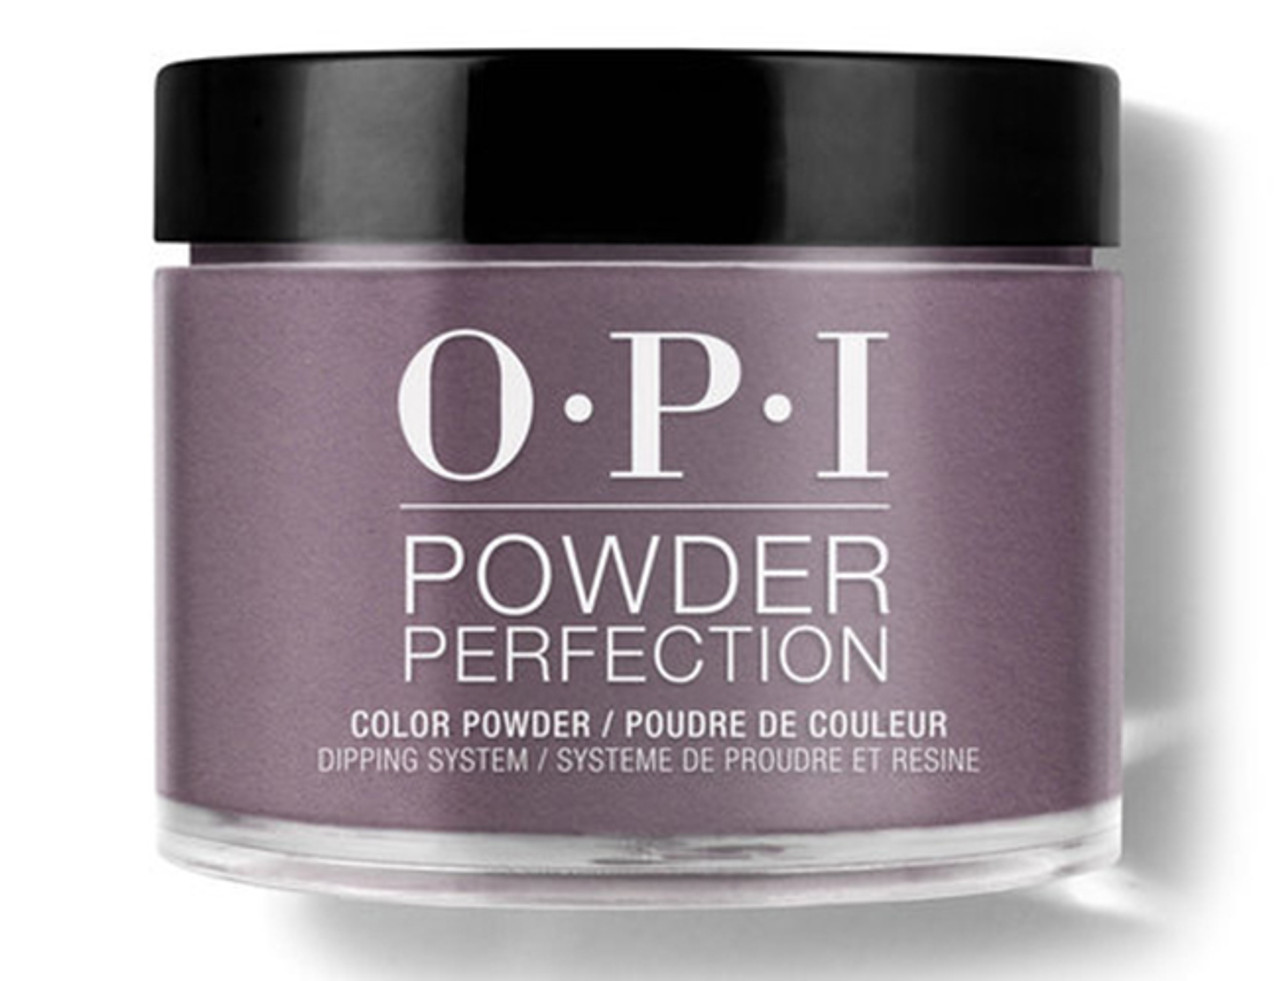 OPI Dipping Powder Perfection Lincoln Park After Dark - 1.5 oz / 43 G